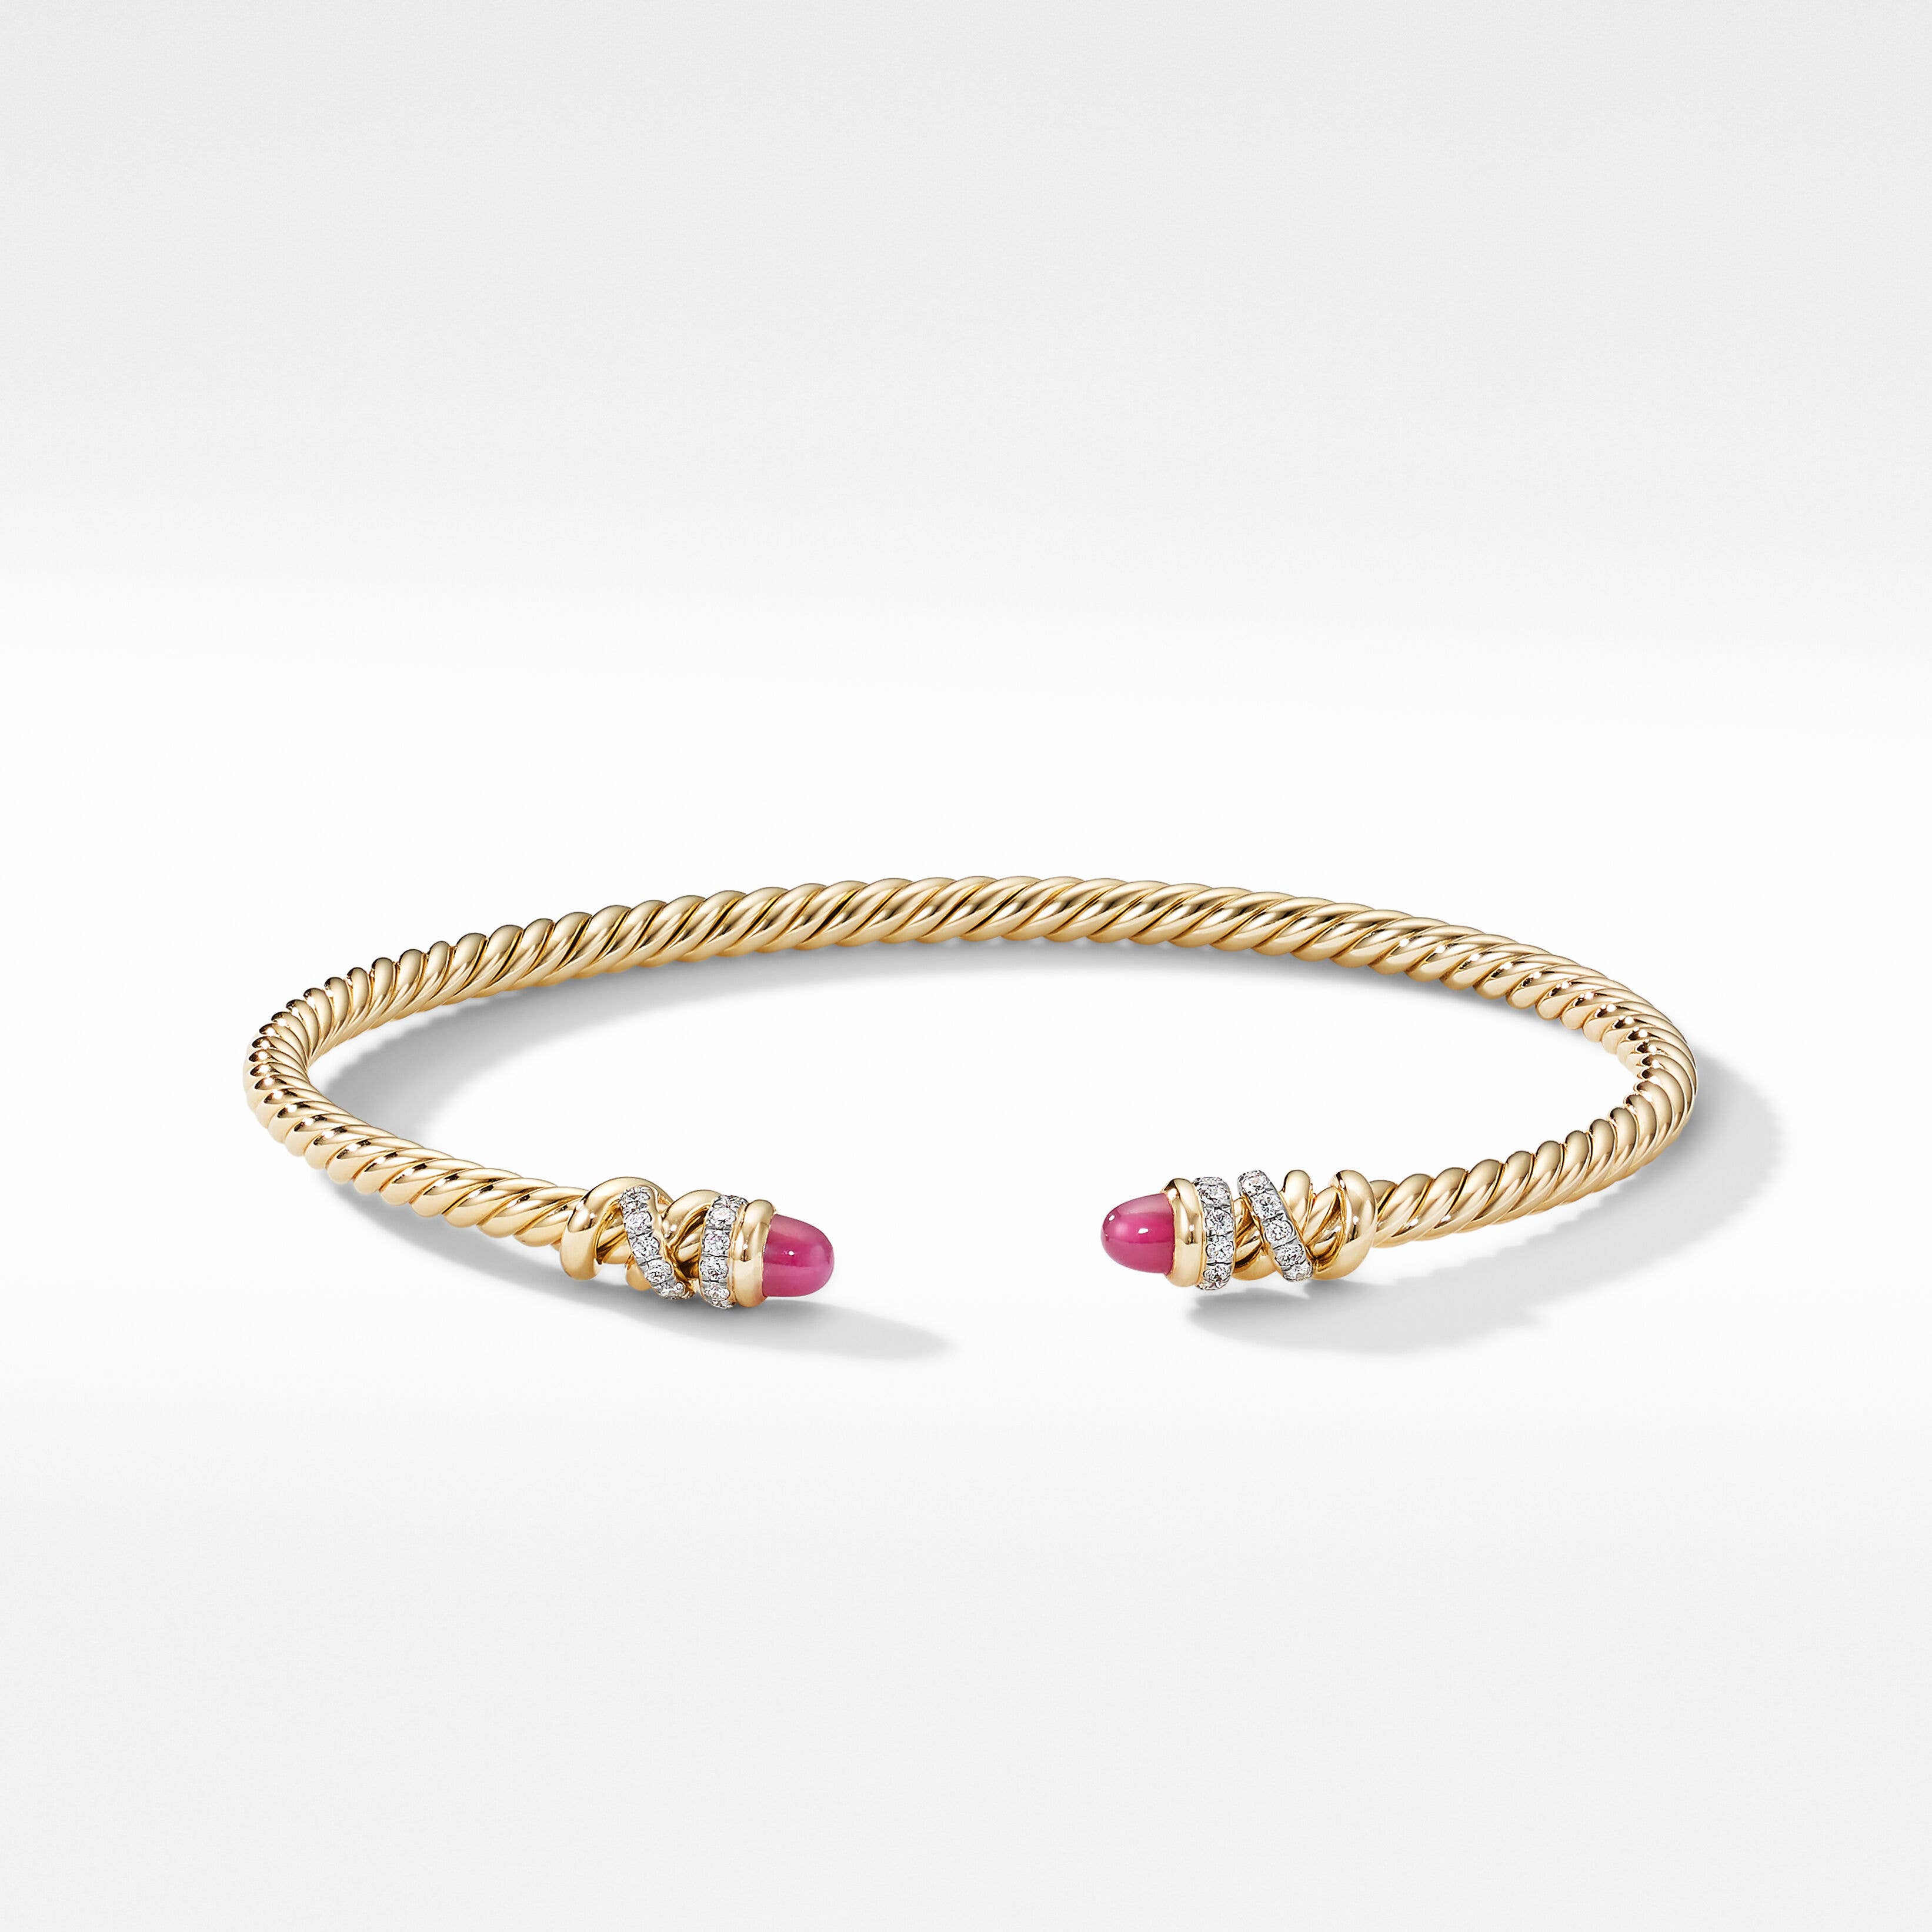 Petite Helena Color Bracelet in 18K Yellow Gold with Rubies and Pavé Diamonds